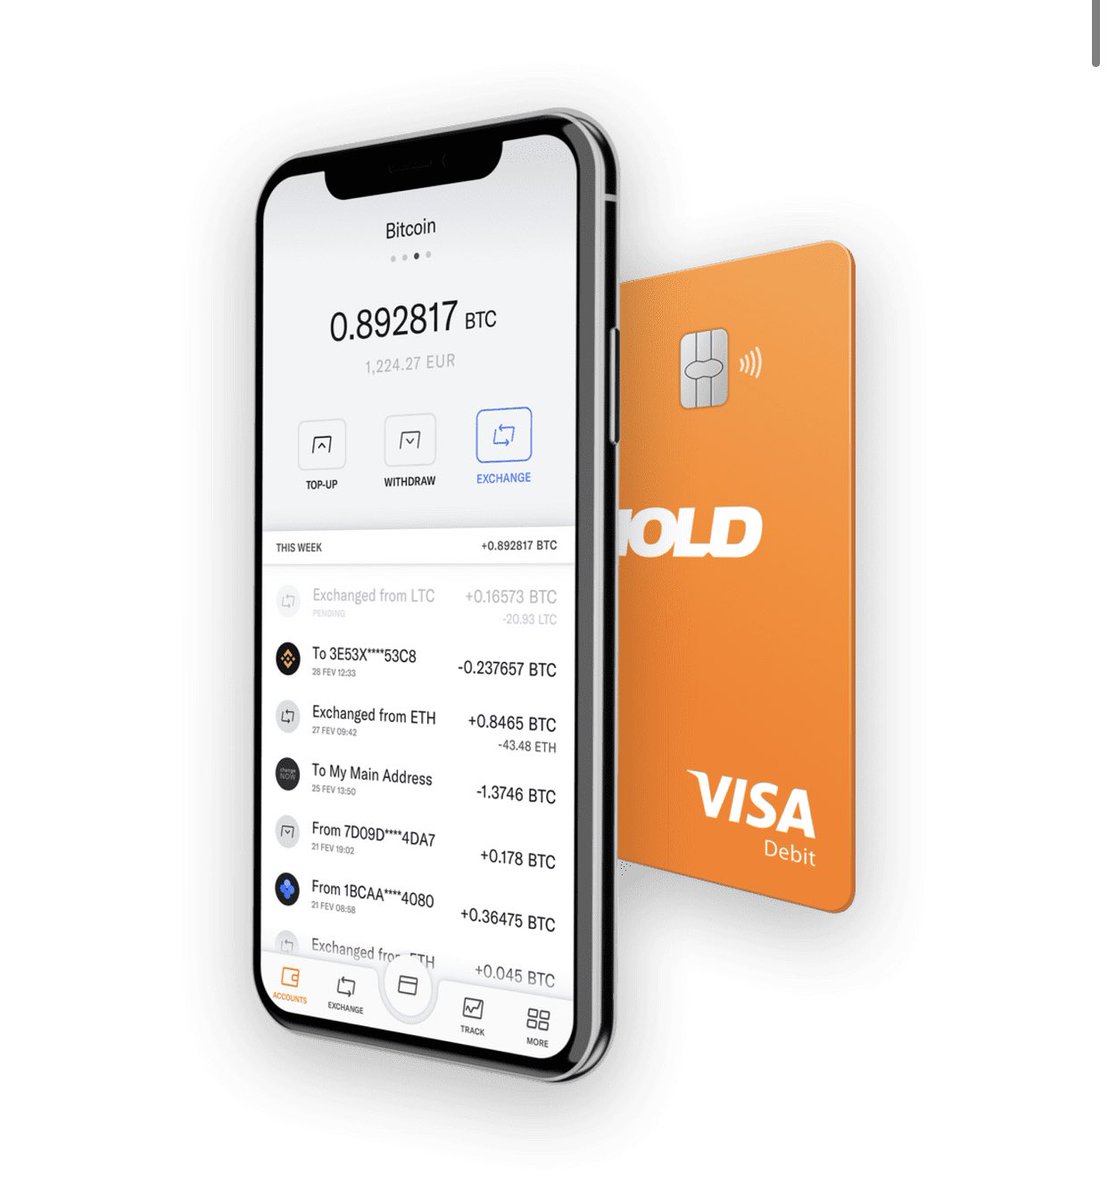 3) This also leads me to reason 3: @Utrust just launched their new HOLD wallet.You can trade inside, but also you‘ll be able to spend crypto with physical VISA cards.So  $UTK just became superior to  $CRO and  $SXP, while sitting on a WAY lower mcap = WAY more upside potential.